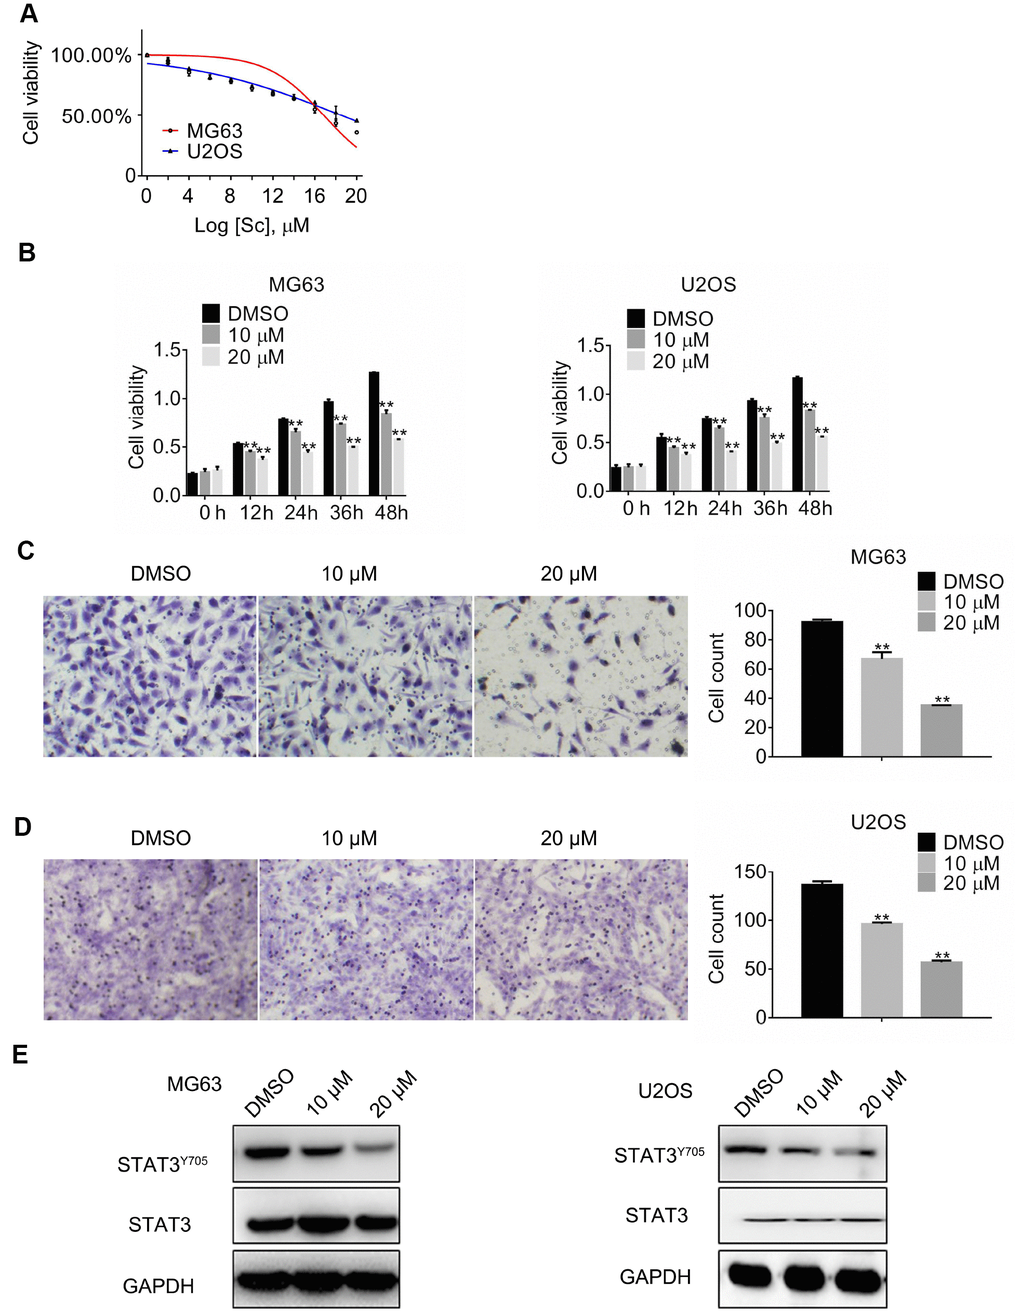 Sodium cantharidate represses growth, migration, and STAT3 activation in osteosarcoma cells. (A) Half-maximum inhibitory concentration (IC50) values obtained for SC. (B) MTT assay results in cultured MG63 and U2OS cells exposed to SC. Migration assay results in MG63 (C) and U2OS (D) cells treated for 24 h with DMSO (vehicle) or SC. Magnification, 200x. Error bars indicate SD. **p E). Western blot analyses of protein expression in MG63 and U2OS cells exposed over 24 h to DMSO or SC.